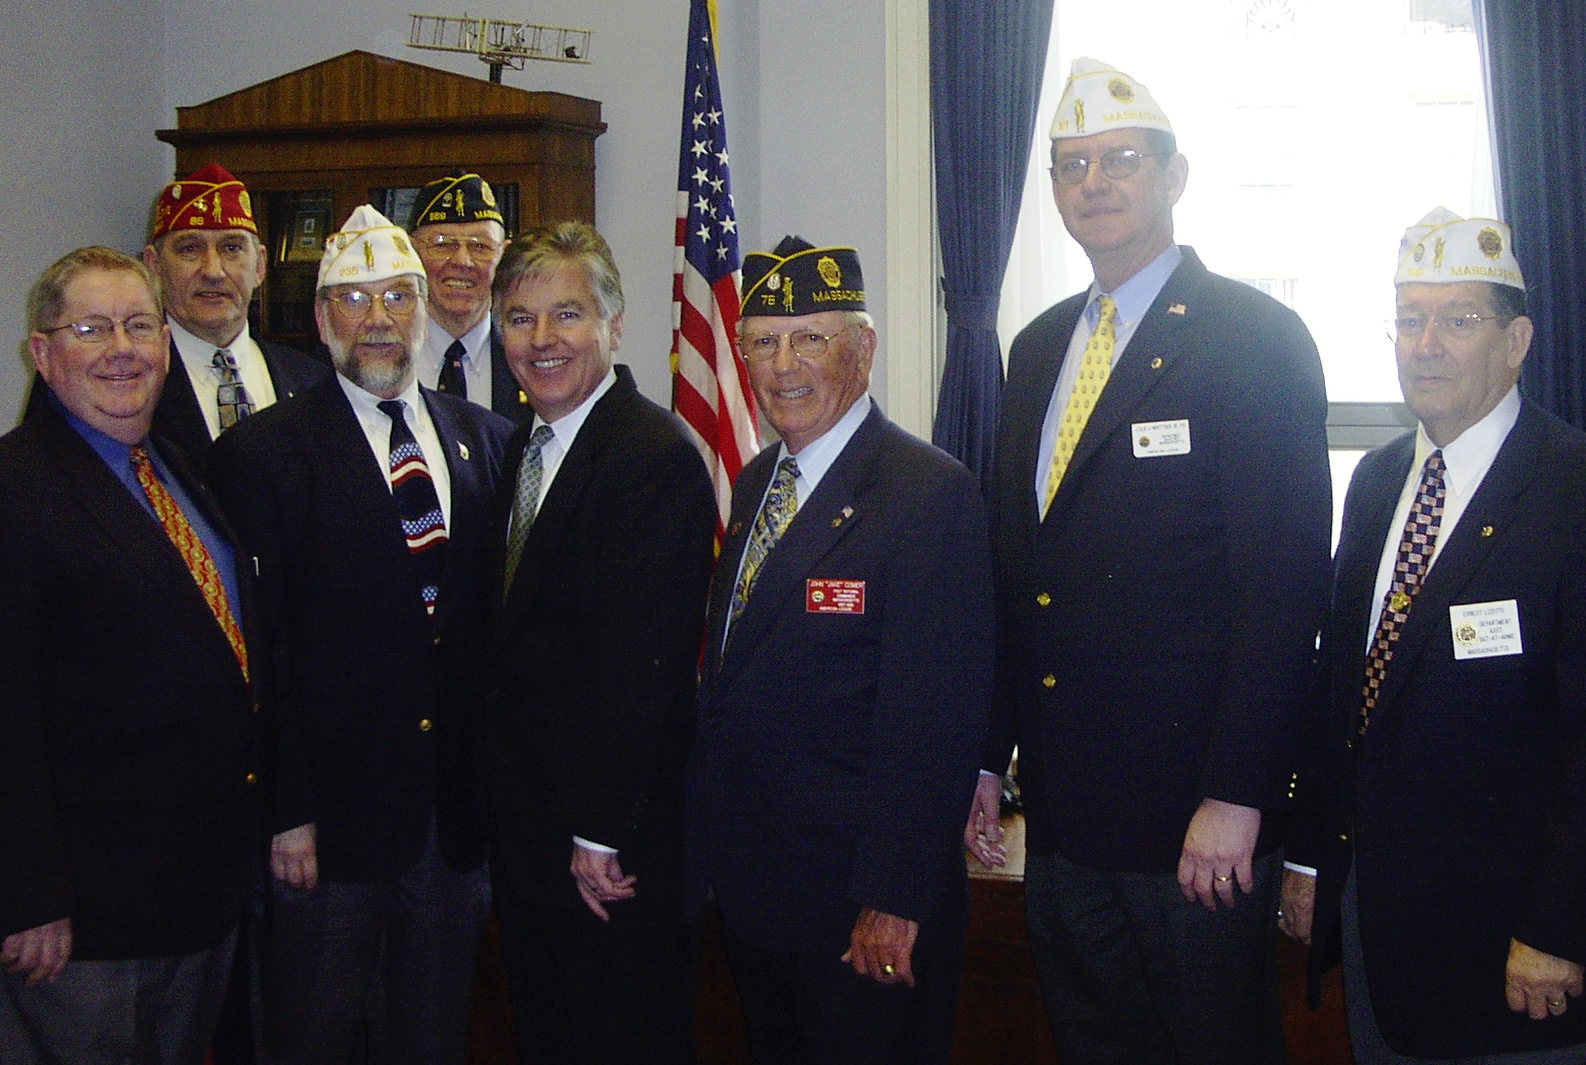 Congressman Meehan meets with the American Legion from Quincy.